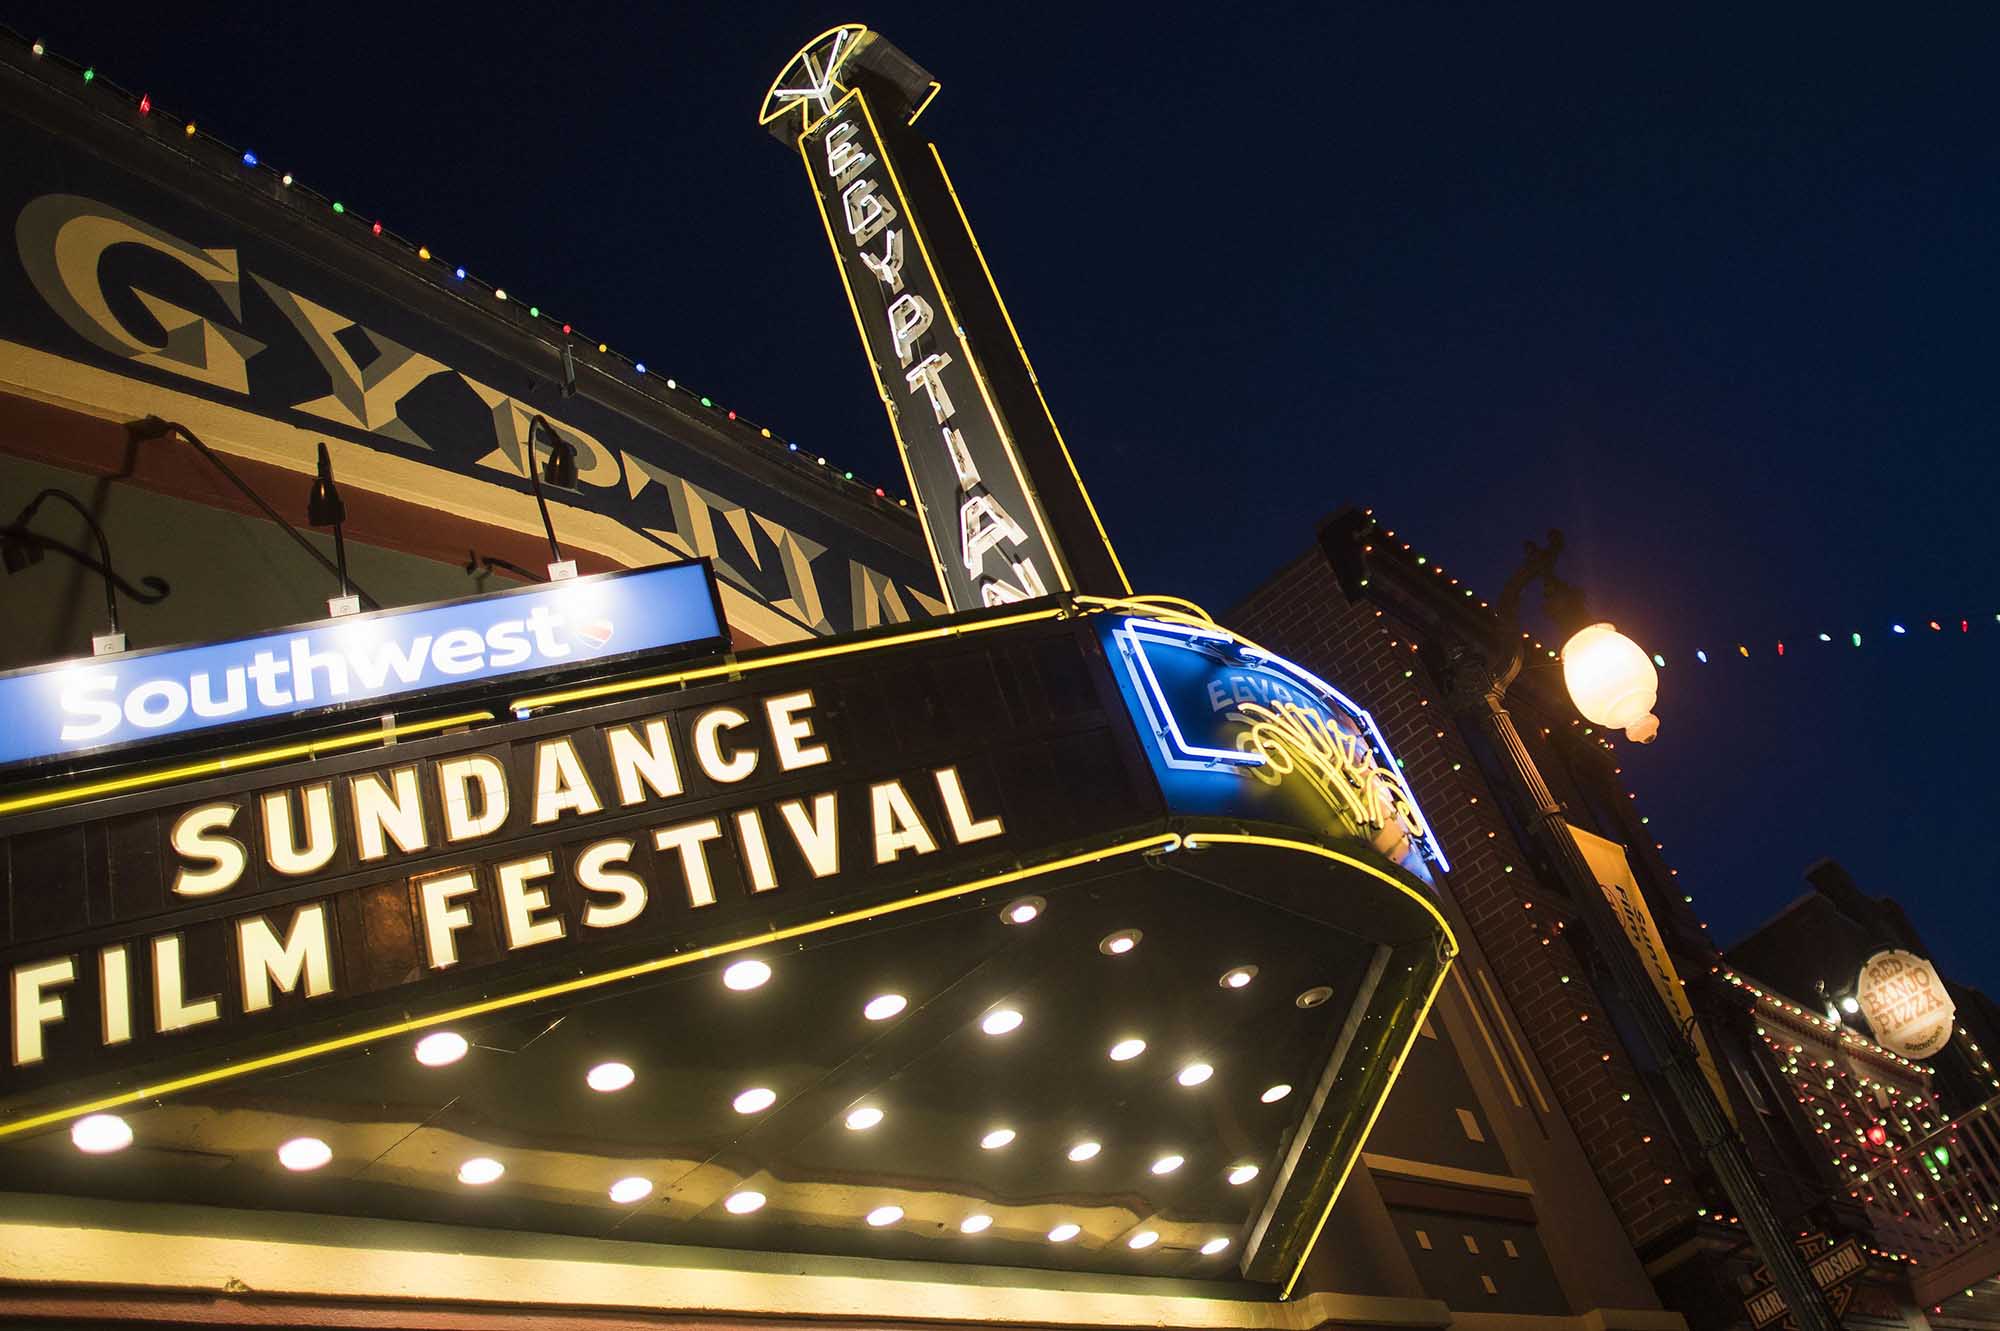 We’re into week two of the annual Sundance Film Festival, and a lot happened over the weekend in the frosty mountain town of Park City. Here’s what’s been going down as the year’s kickoff film festival brings together virtual reality experiments, (even more) independent cinema premieres, and the first major film deal.